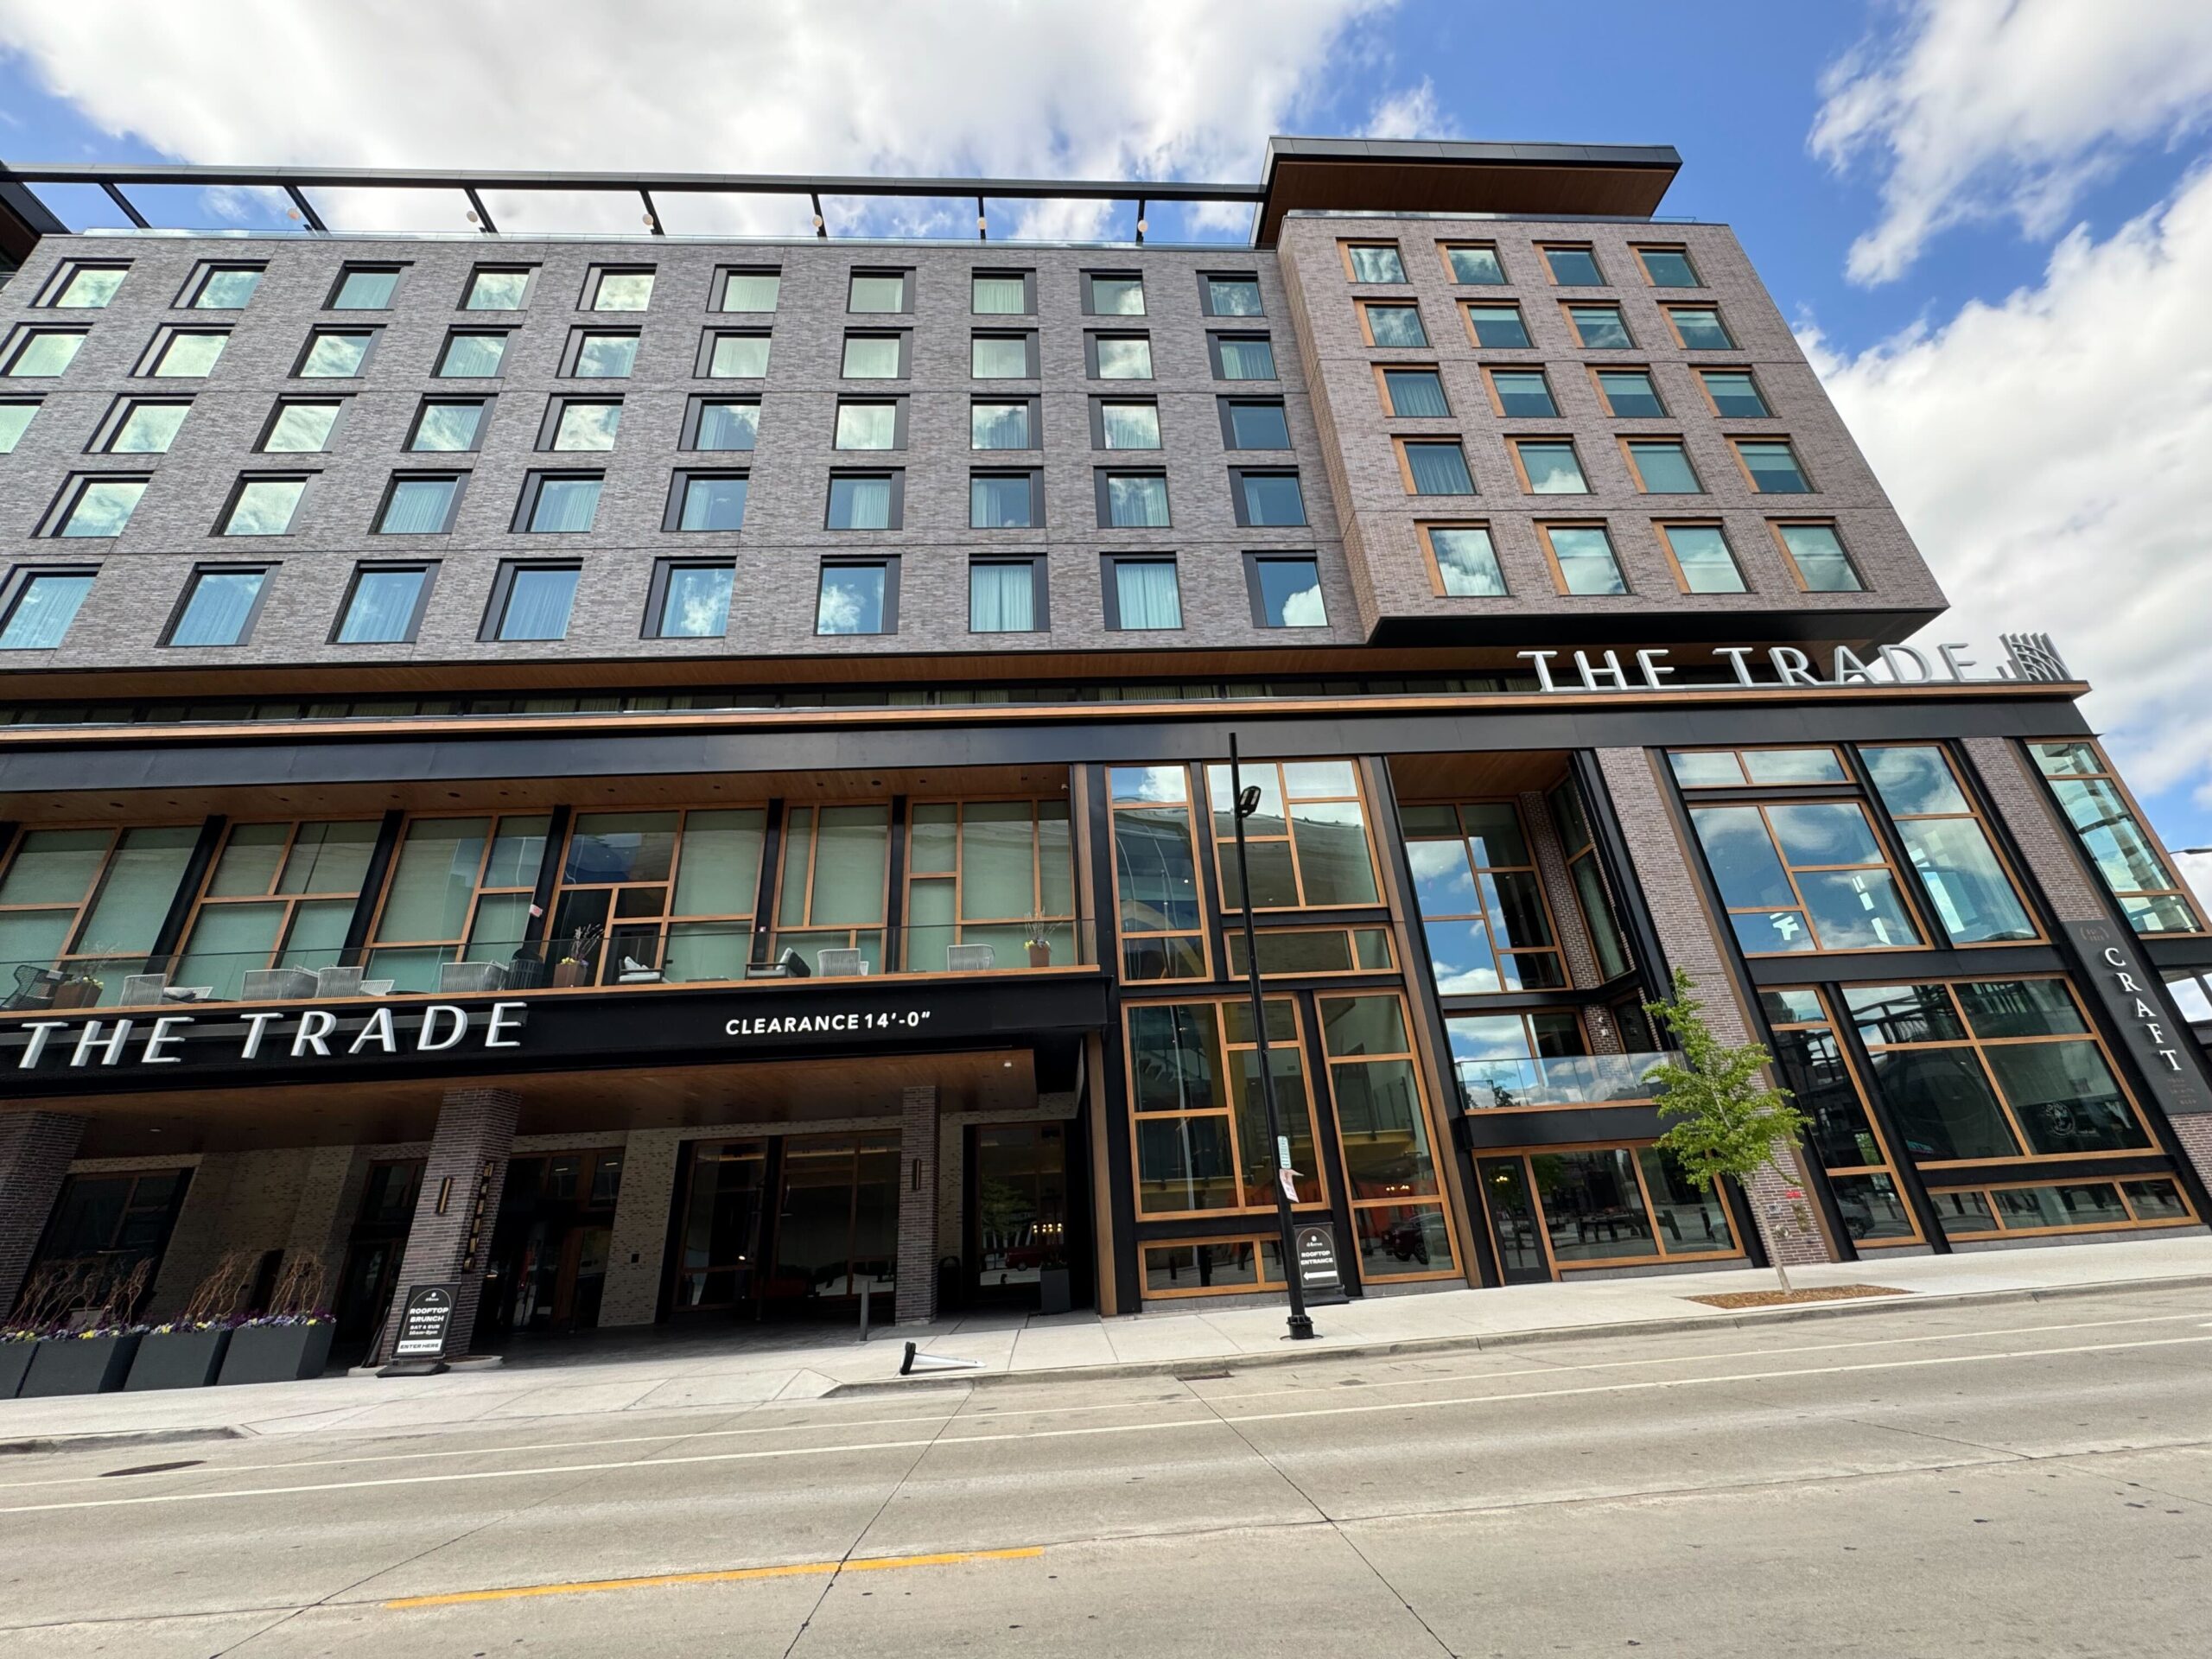 Workers at Milwaukee’s Trade hotel seek union, accuse employer of unfair labor practices